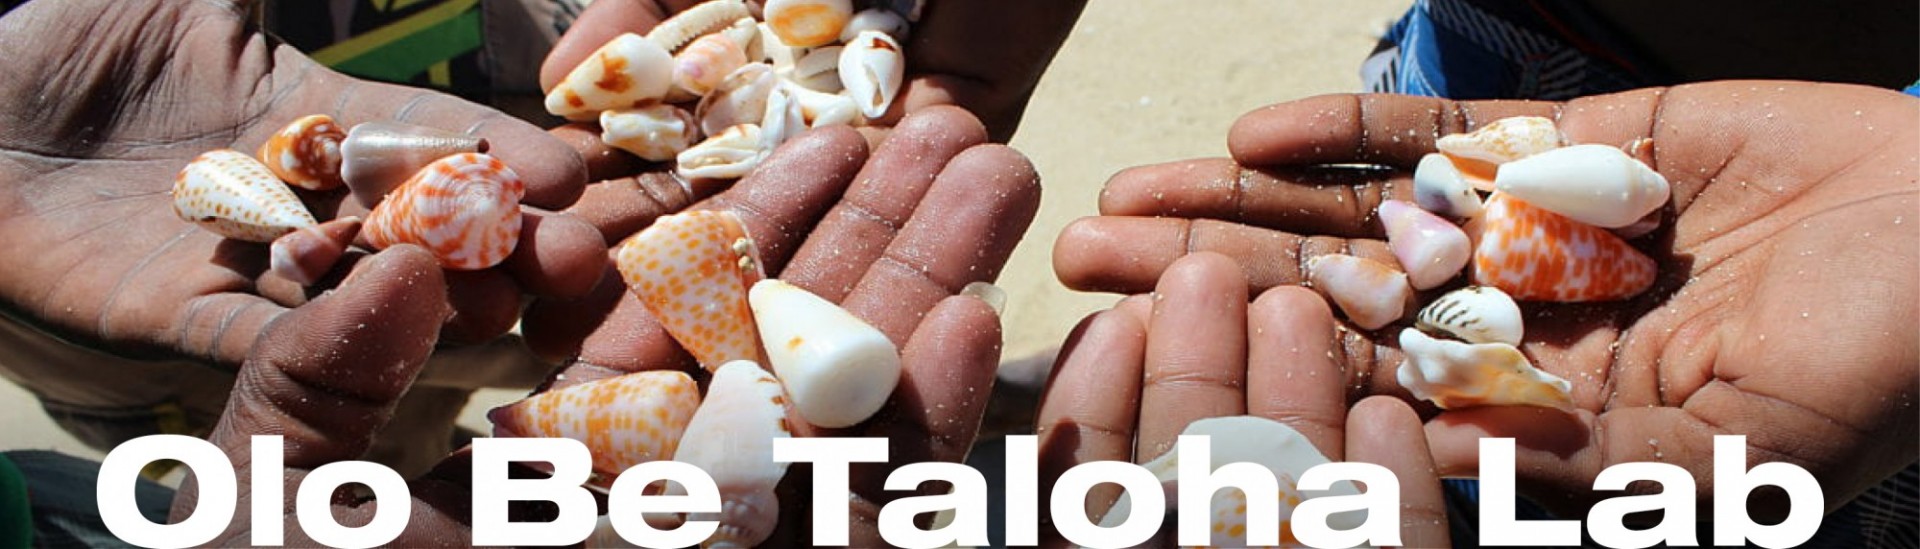 Olo Be Taloha Lab - hands with palms up holding assorted shells